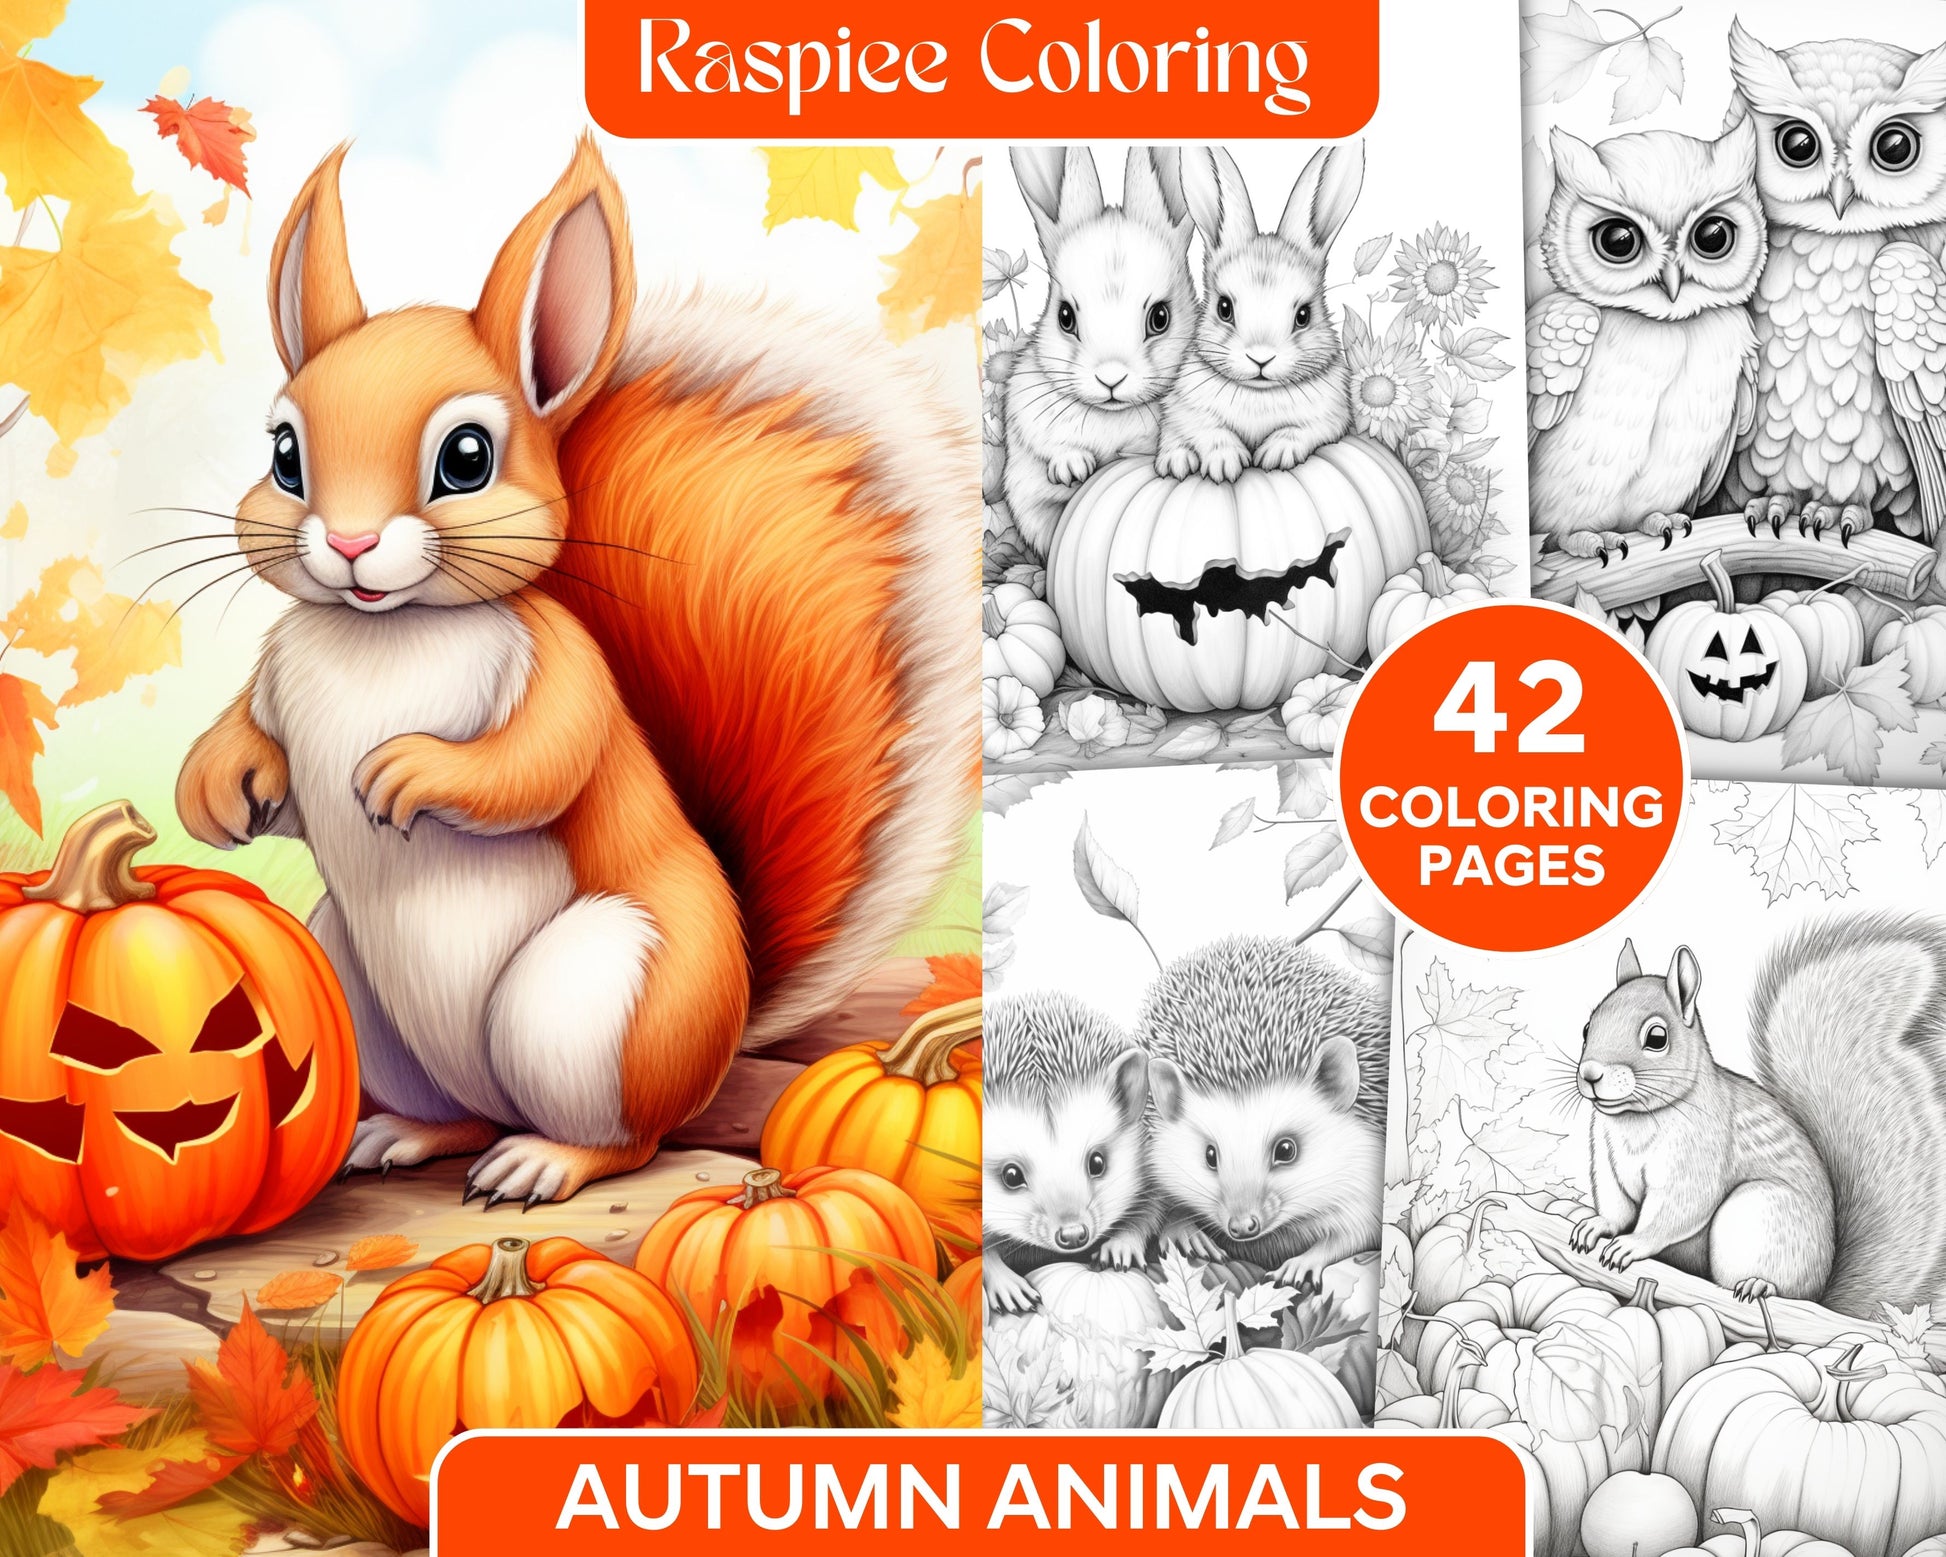 Autumn animals grayscale coloring pages for adults and kids printable â coloring